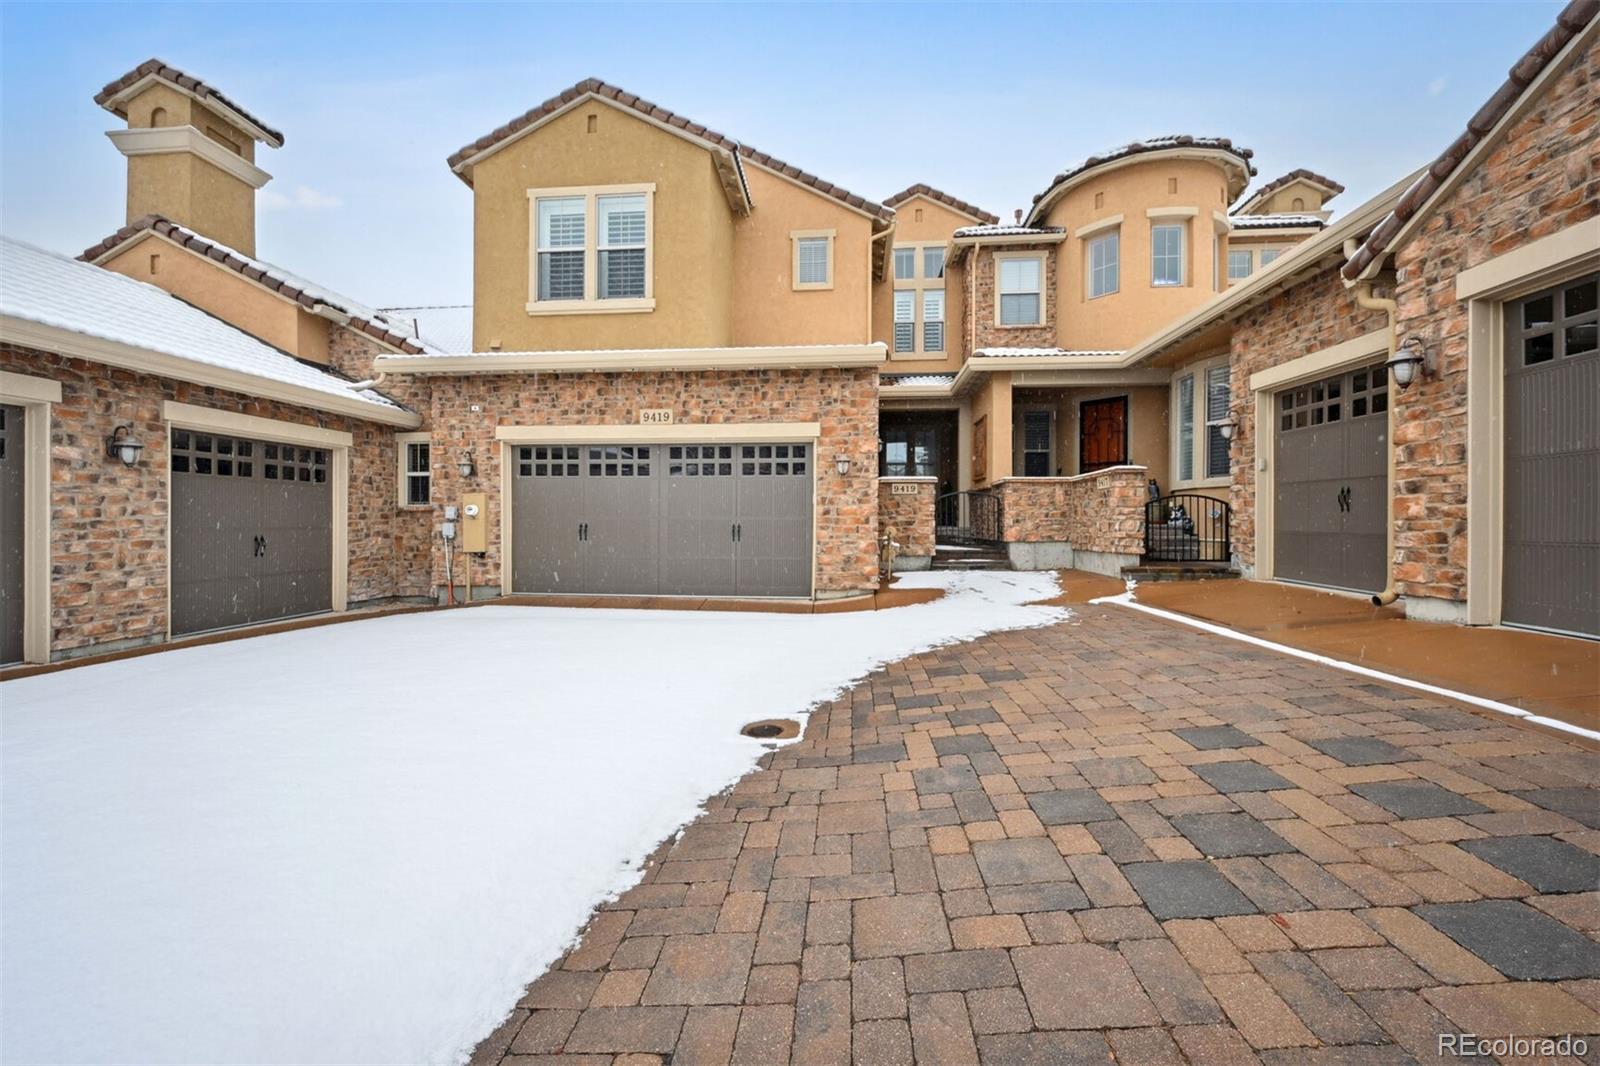 9419  viaggio way, highlands ranch sold home. Closed on 2024-04-18 for $970,000.